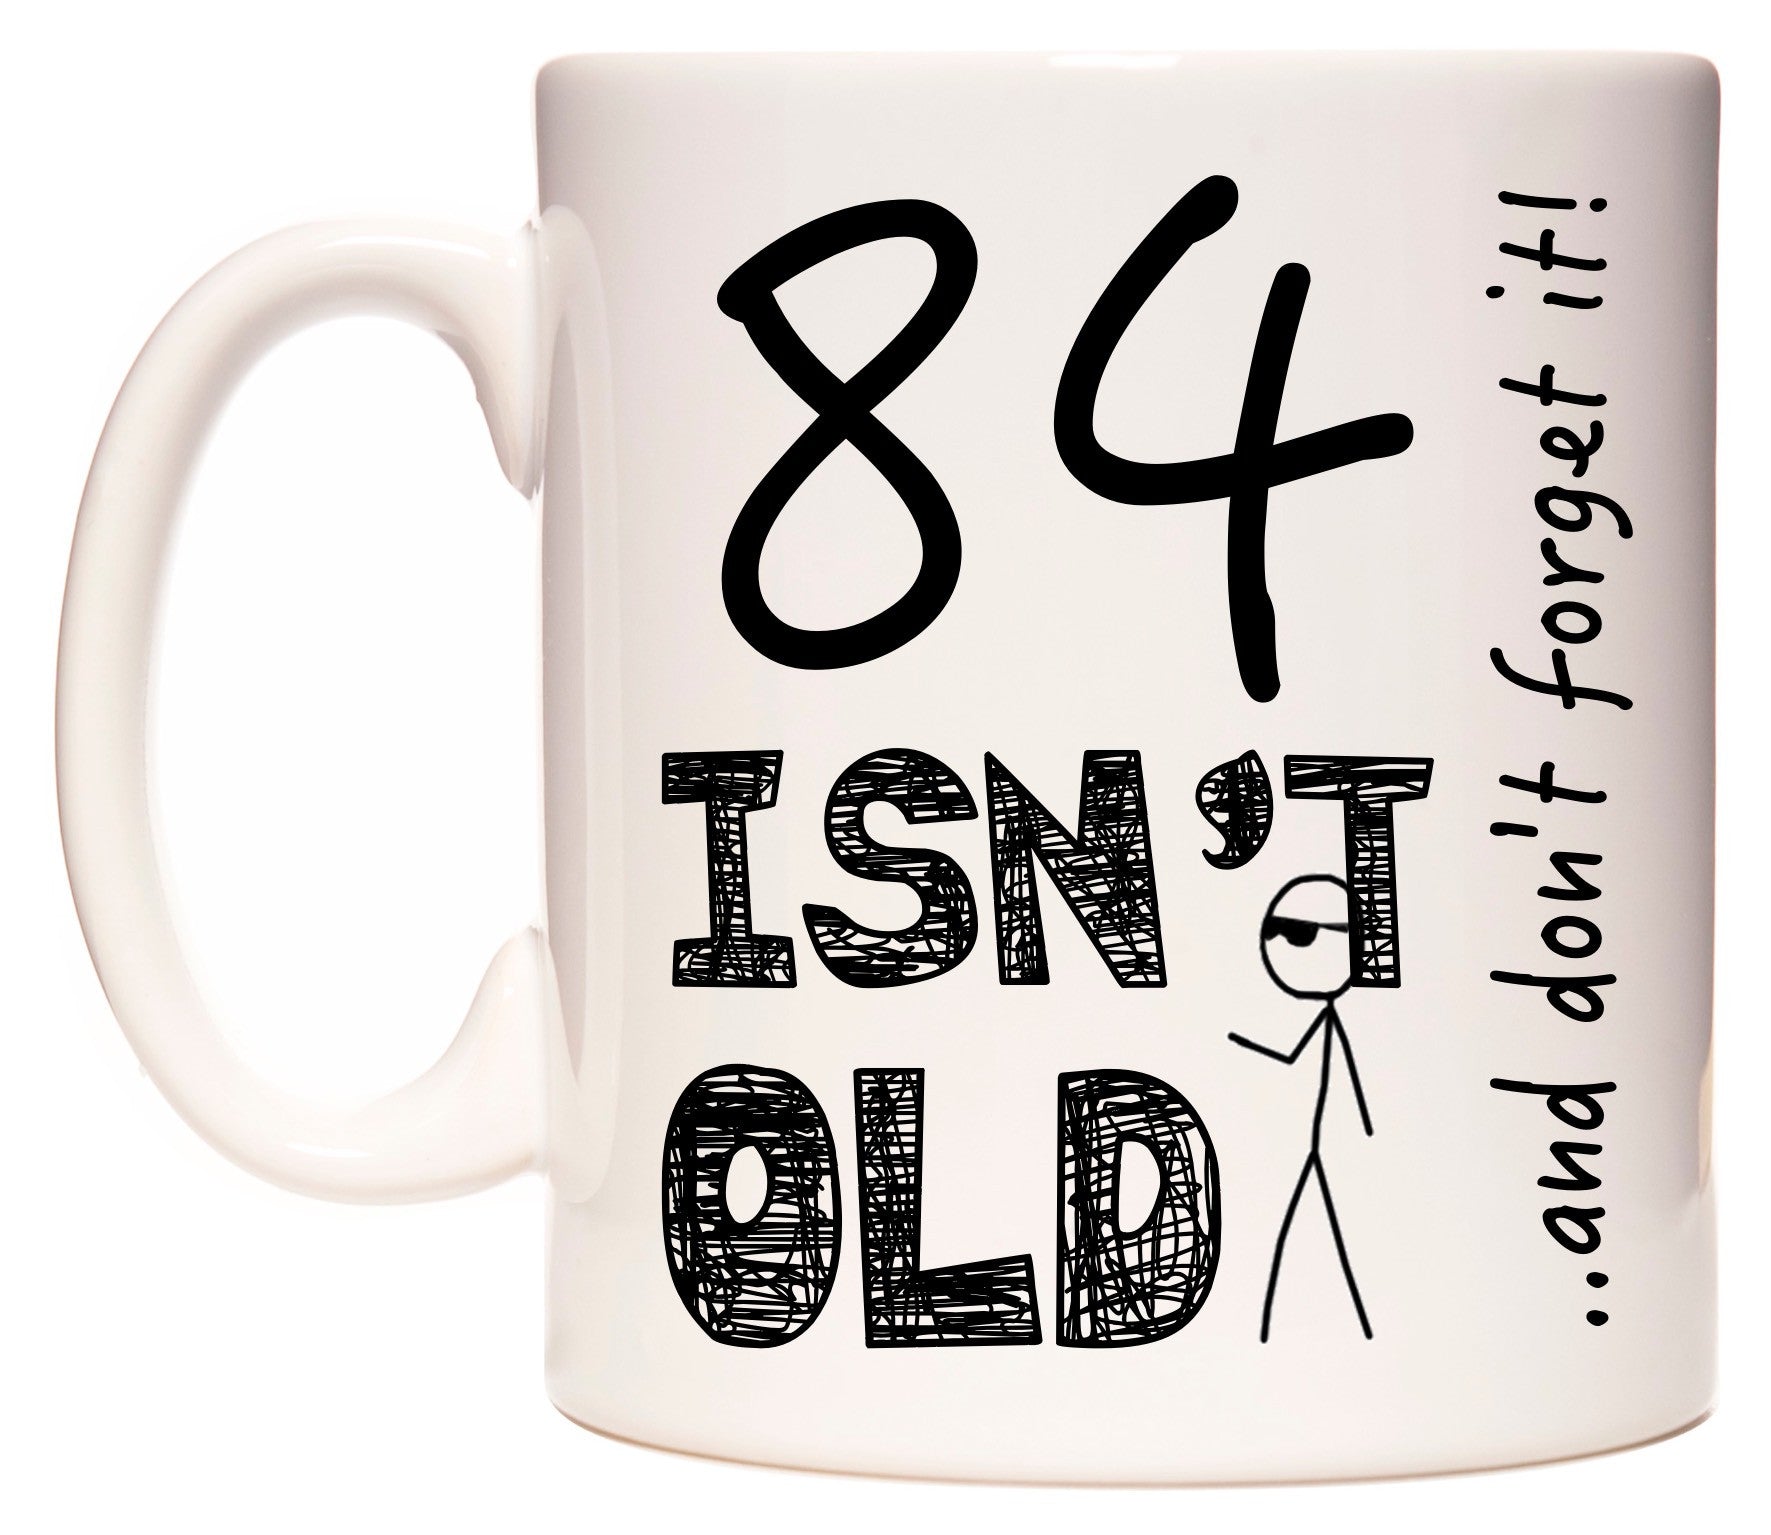 This mug features 84 Isn't Old